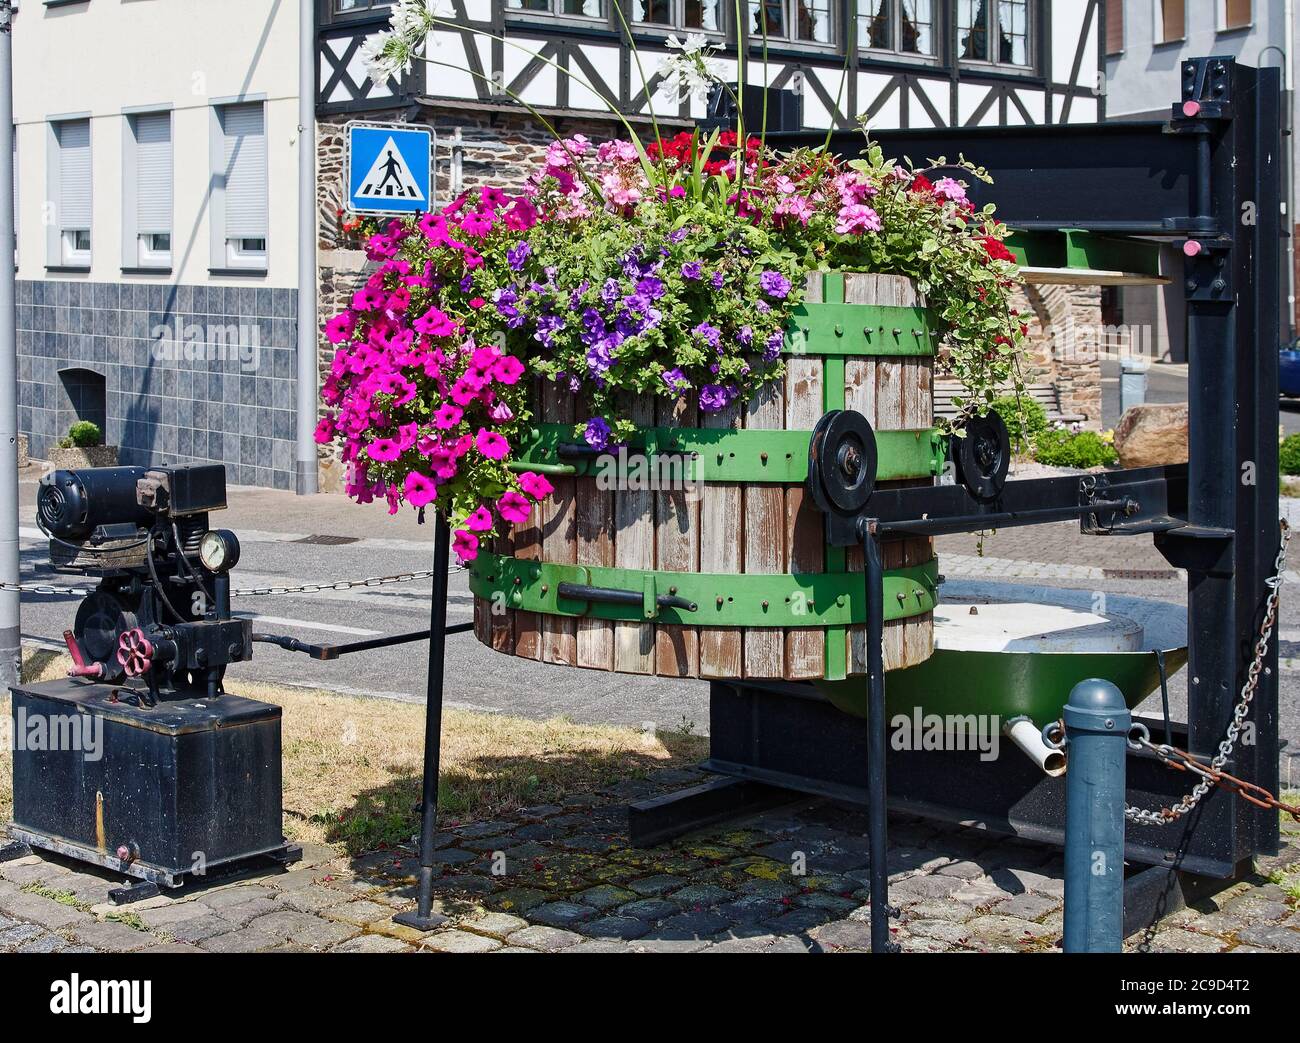 old wine making equipment, outside decorations, colorful flowers in wine barrel, street, cityscape, Europe, Zell; Germany Stock Photo